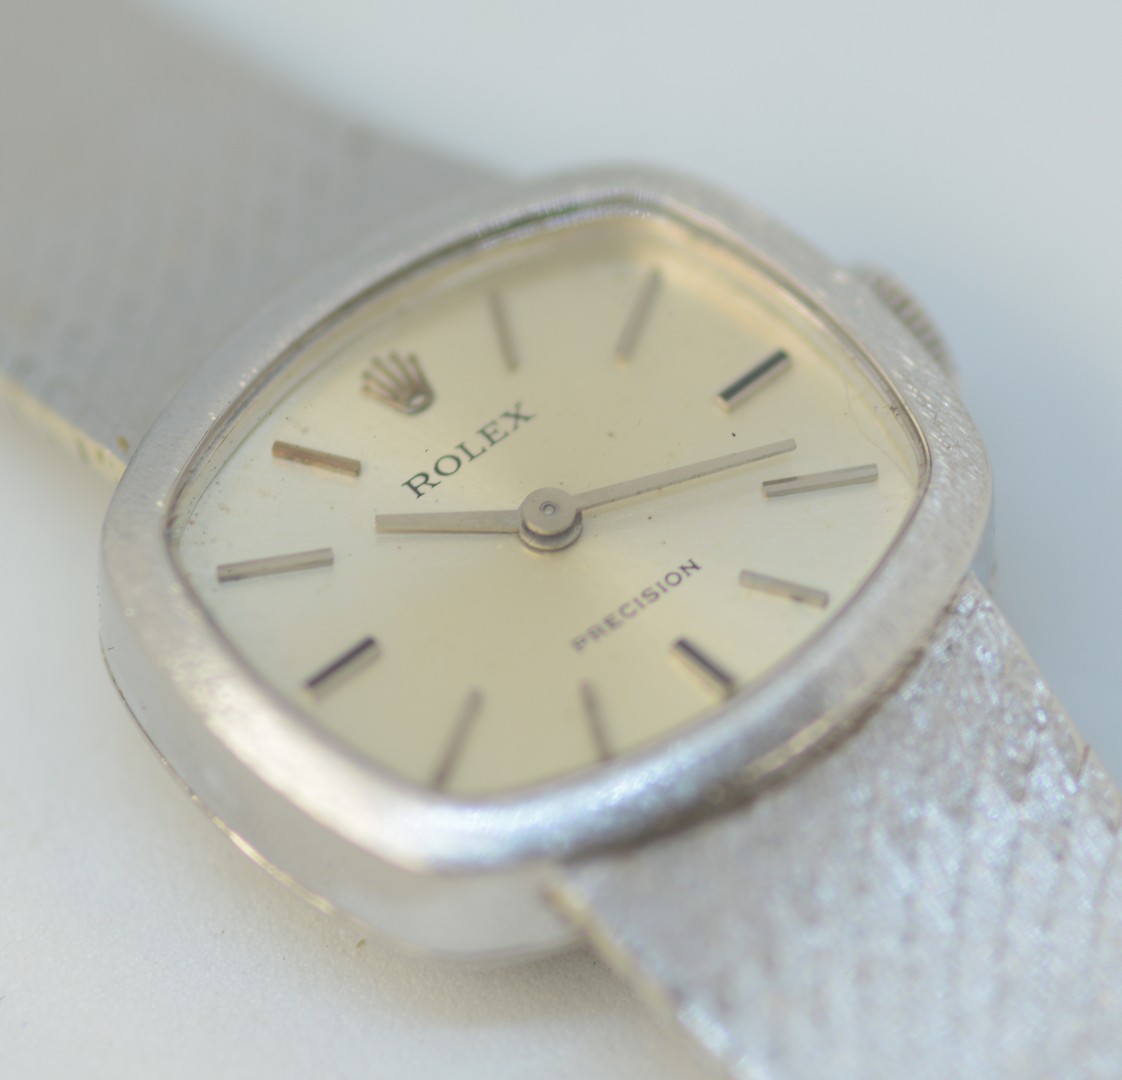 Rolex / Precision - Lady's White gold Wrist Watch - Image 2 of 13